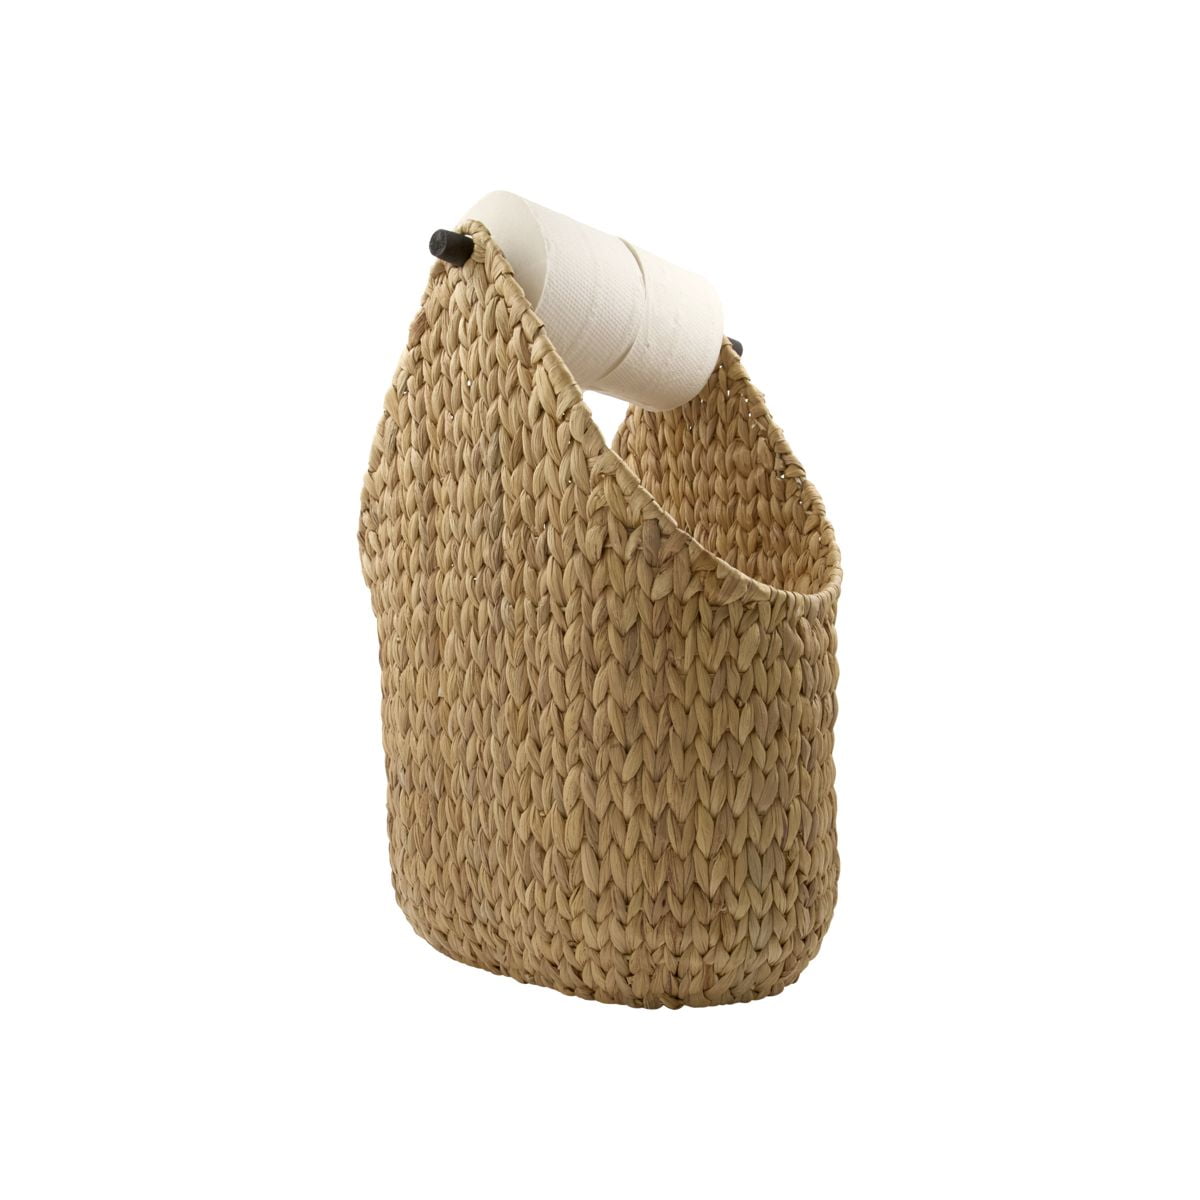 3 Section Bathroom Basket Wicker Baskets for Shelves Seagrass Toilet Tank  Basket 3 Sections Hand Woven